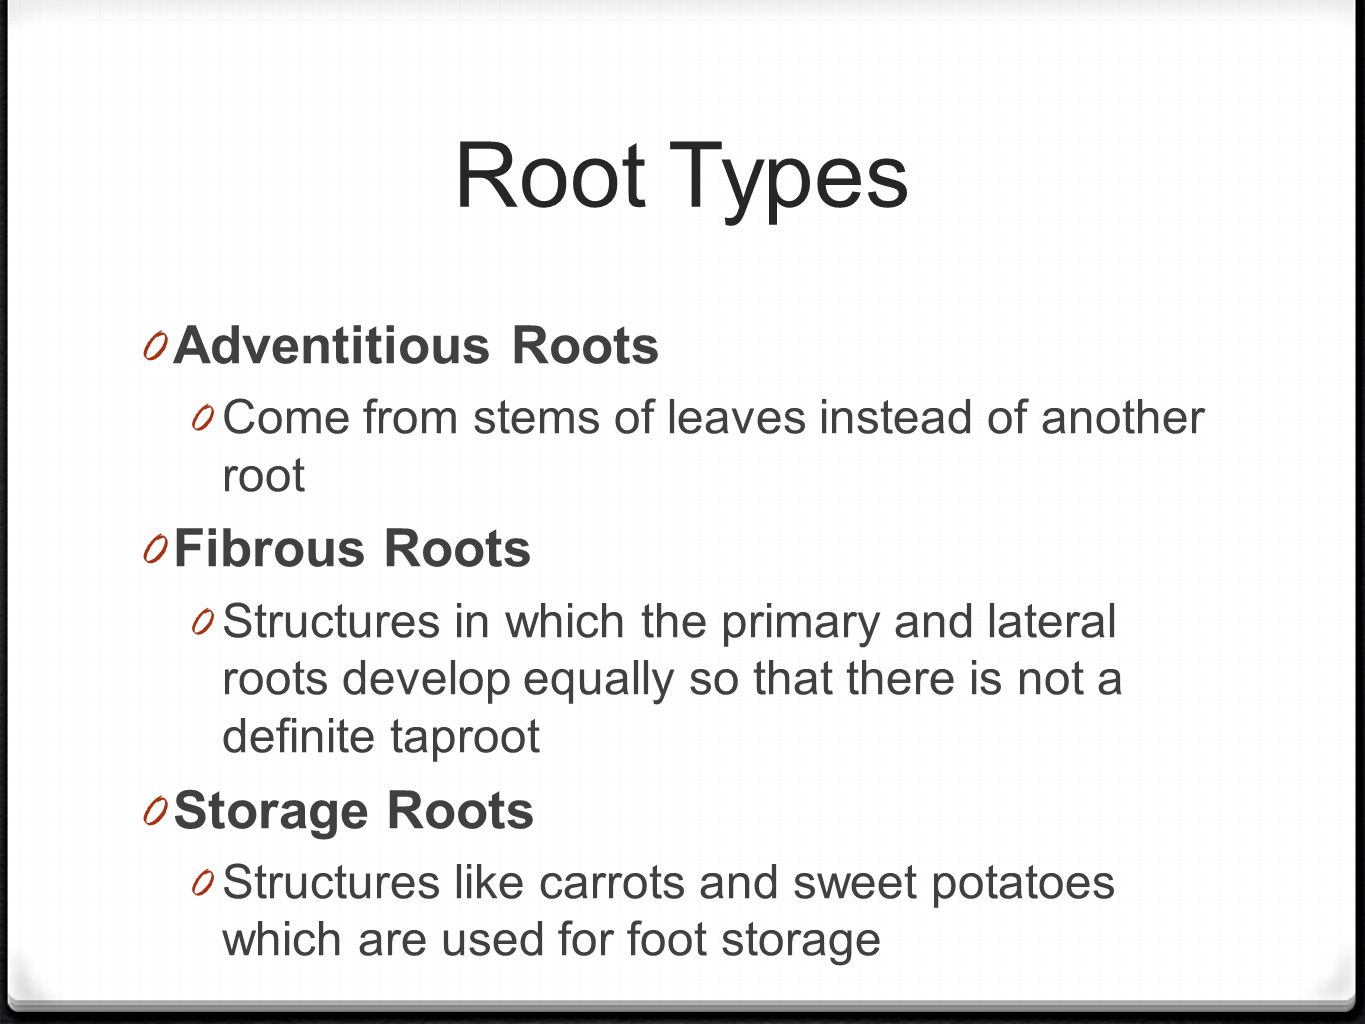 Root Types 0 Adventitious Roots 0 Come from stems of leaves instead of another root 0 Fibrous Roots 0 Structures in which the primary and lateral roots develop equally so that there is not a definite taproot 0 Storage Roots 0 Structures like carrots and sweet potatoes which are used for foot storage